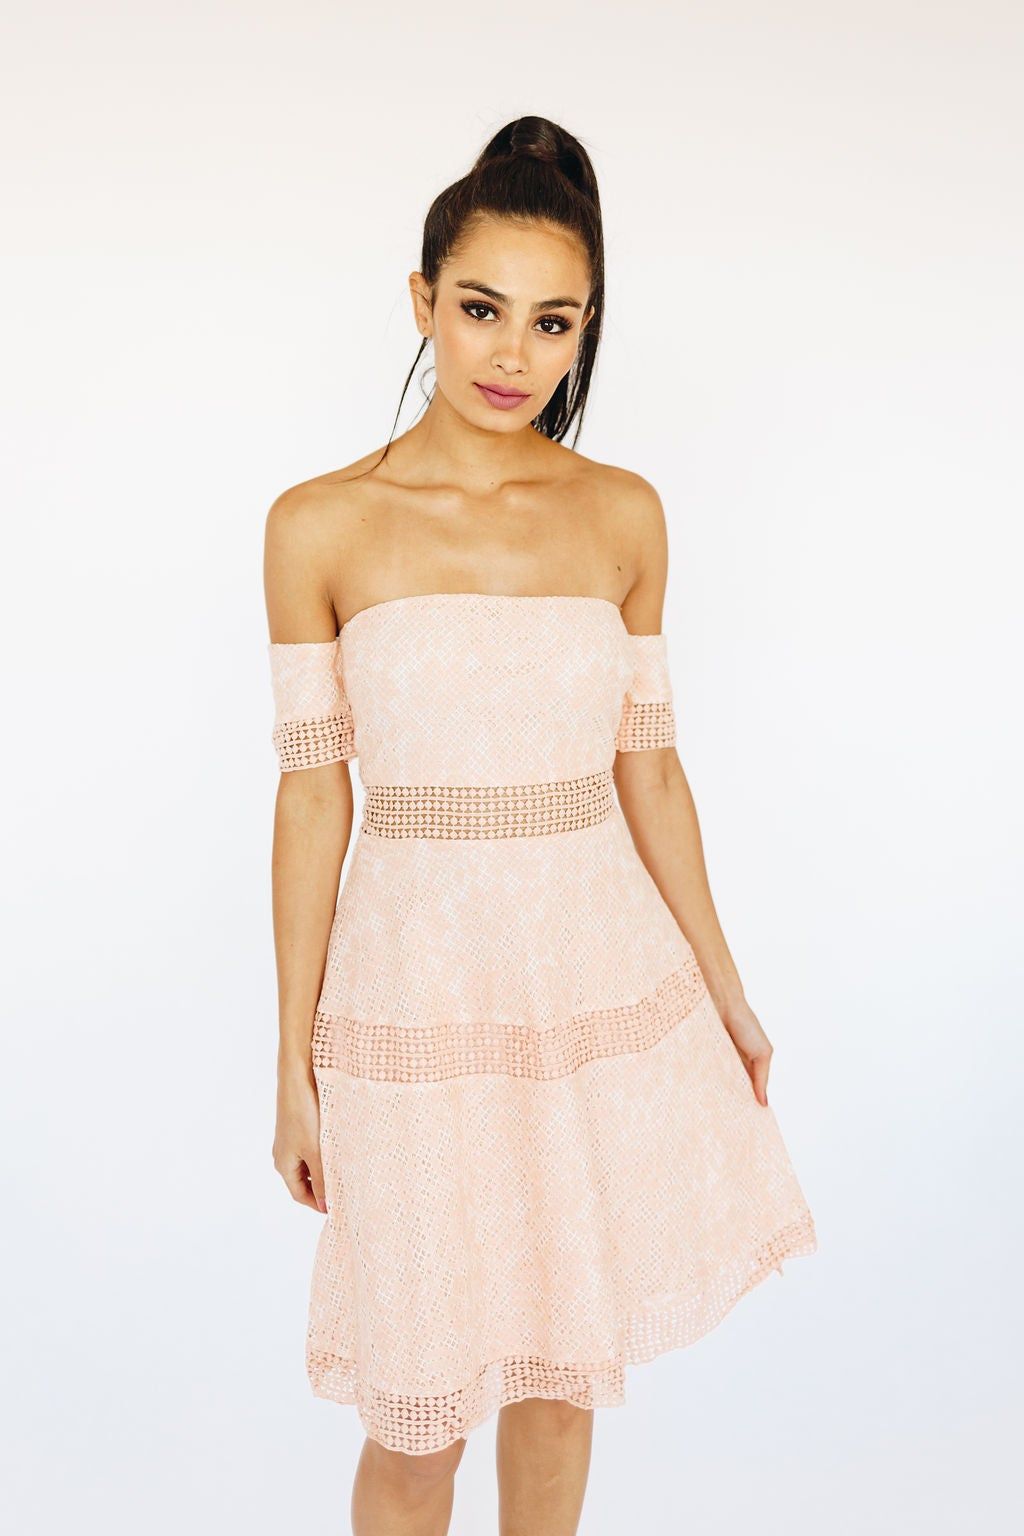 Style Danika 1 McKenzie Rae Size 6 Off The Shoulder Pink Cocktail Dress on Queenly